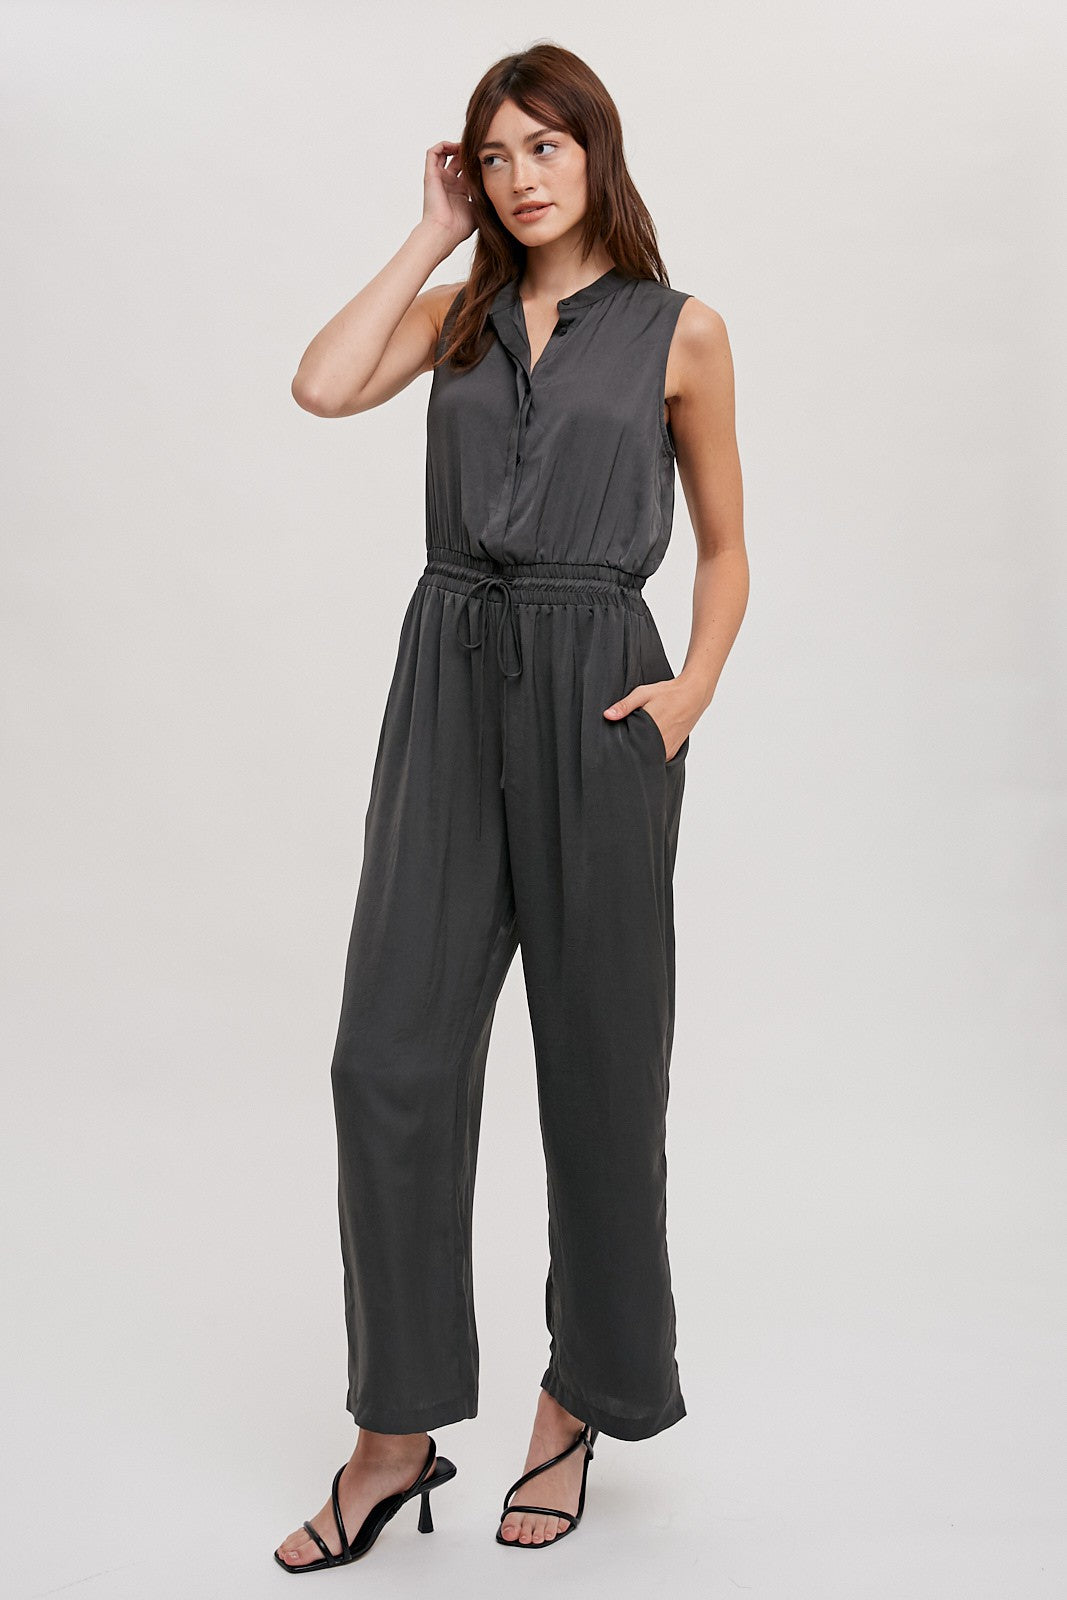 The Dede Satin Jumpsuit in Charcoal